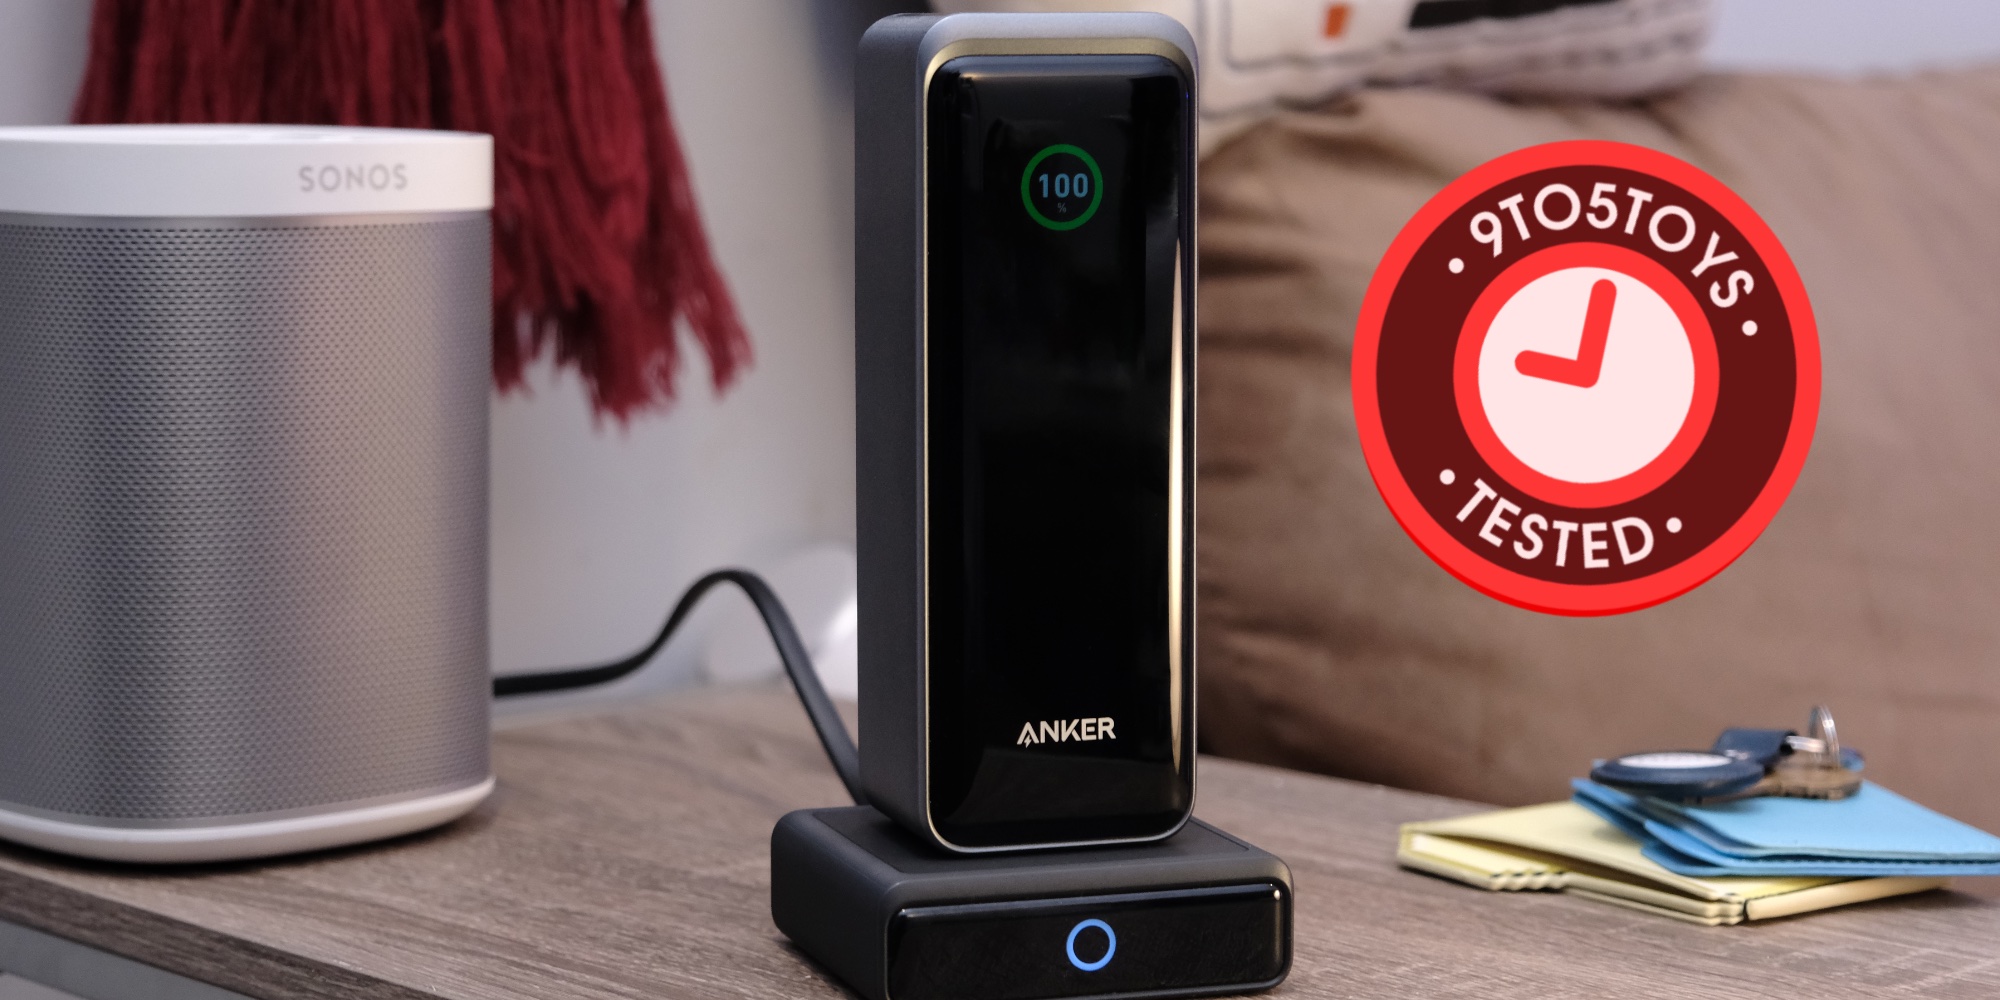 Anker Prime 200W 20,000mAh Power Bank Review - Fourth Source